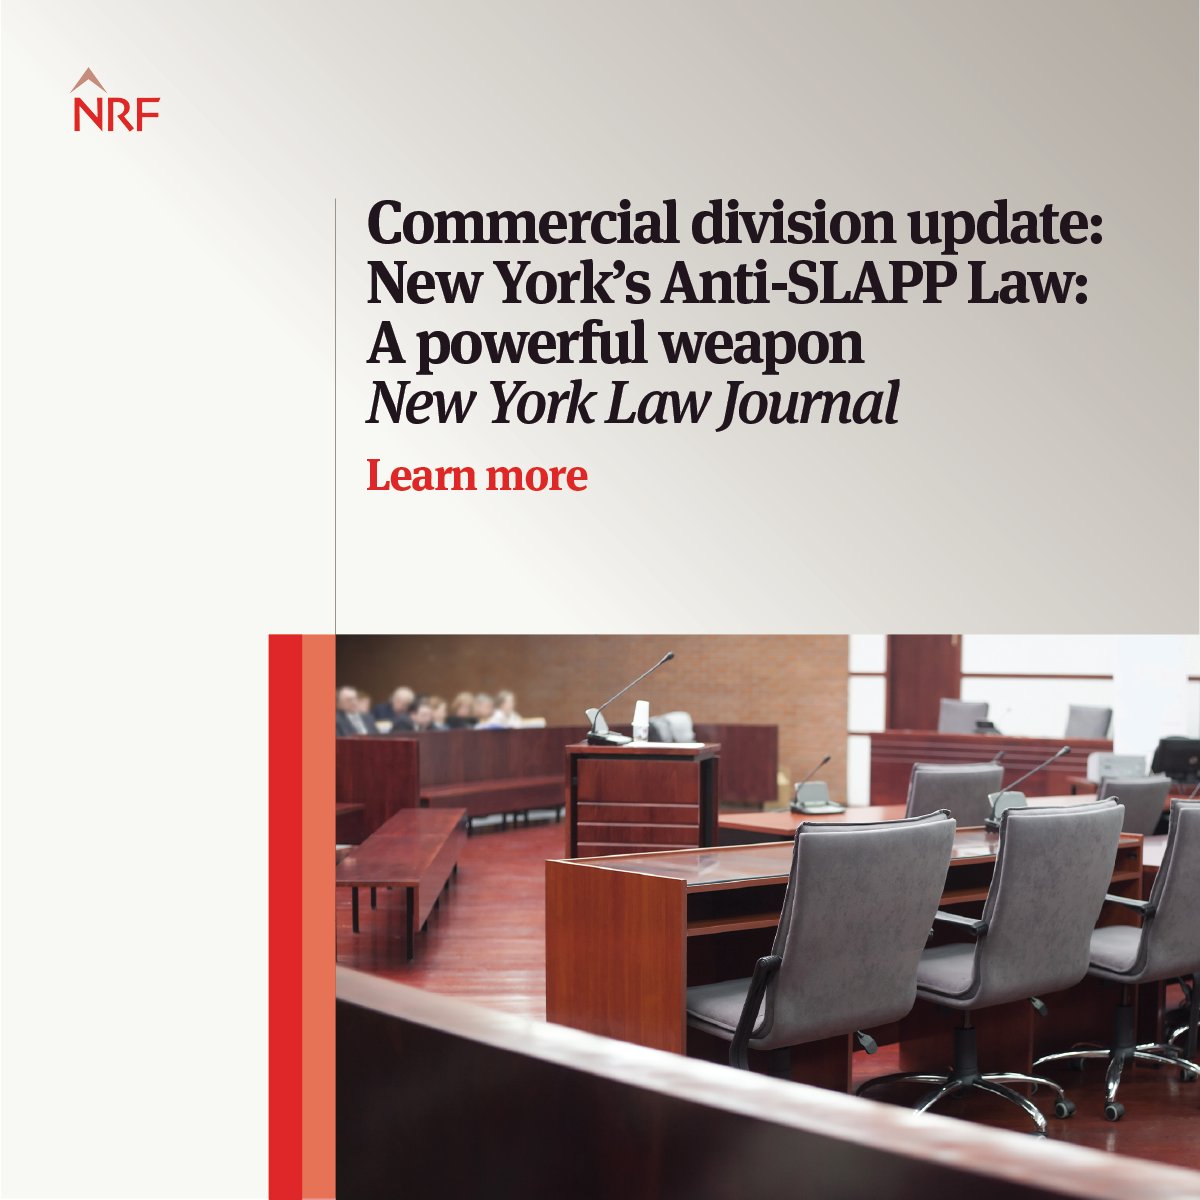 In their latest commercial division update, Tom Hall and Judith Archer discuss recent decisions adjudicating New York's Anti-SLAPP (strategic lawsuits against public participation) law claims that demonstrate the complexities that can be involved. ow.ly/m8QU50RyFzp